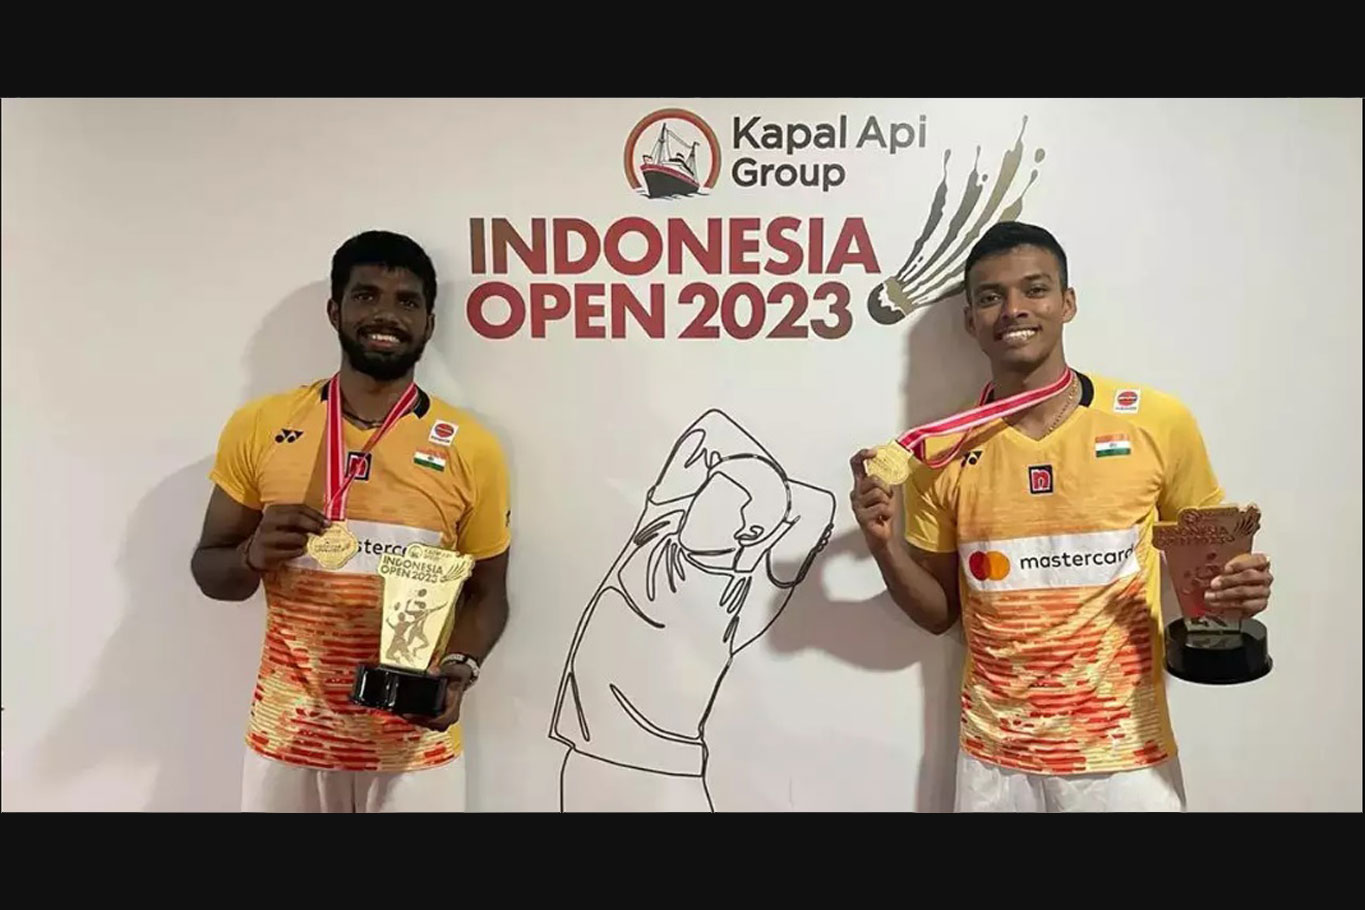 Satwik-Chirag make history with Indonesia Open Men's Doubles championship victory